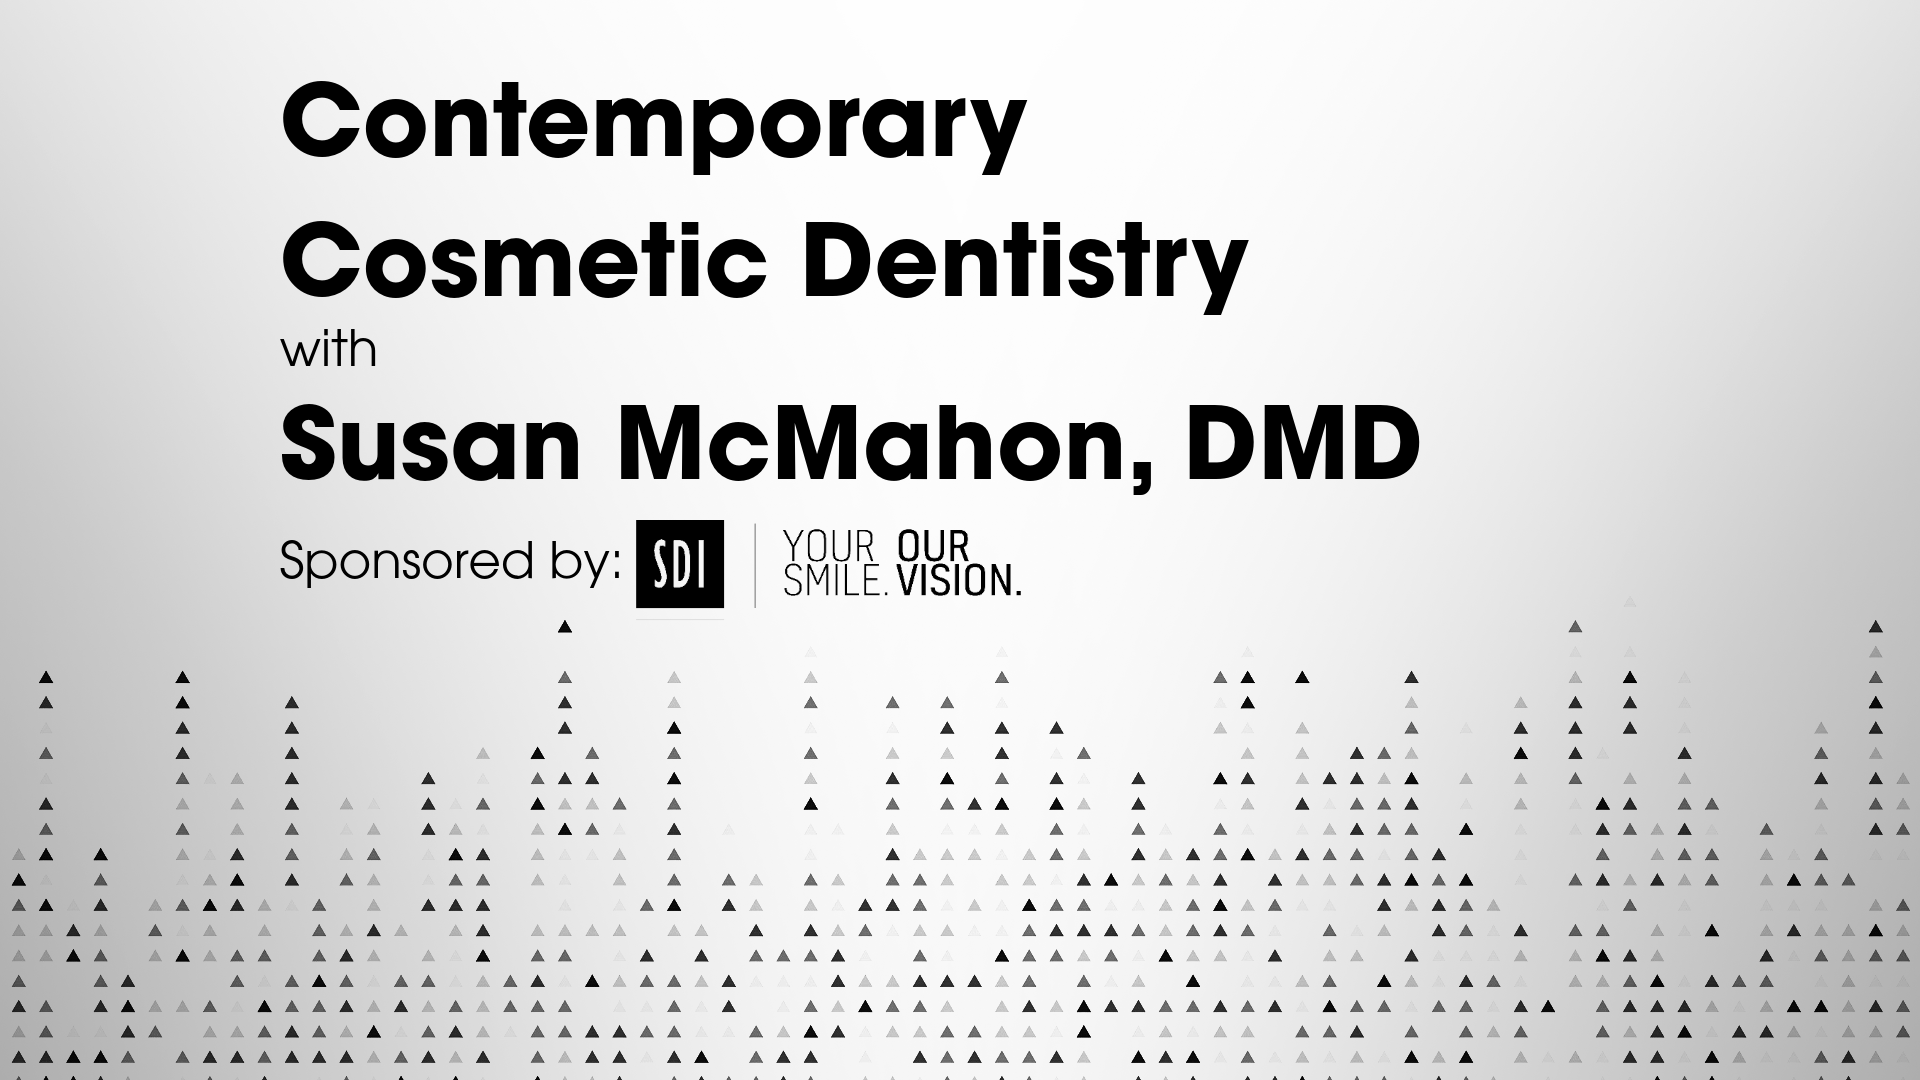 Contemporary Cosmetic Dentistry with Susan McMahon, DMD – Sponsored by: SDI